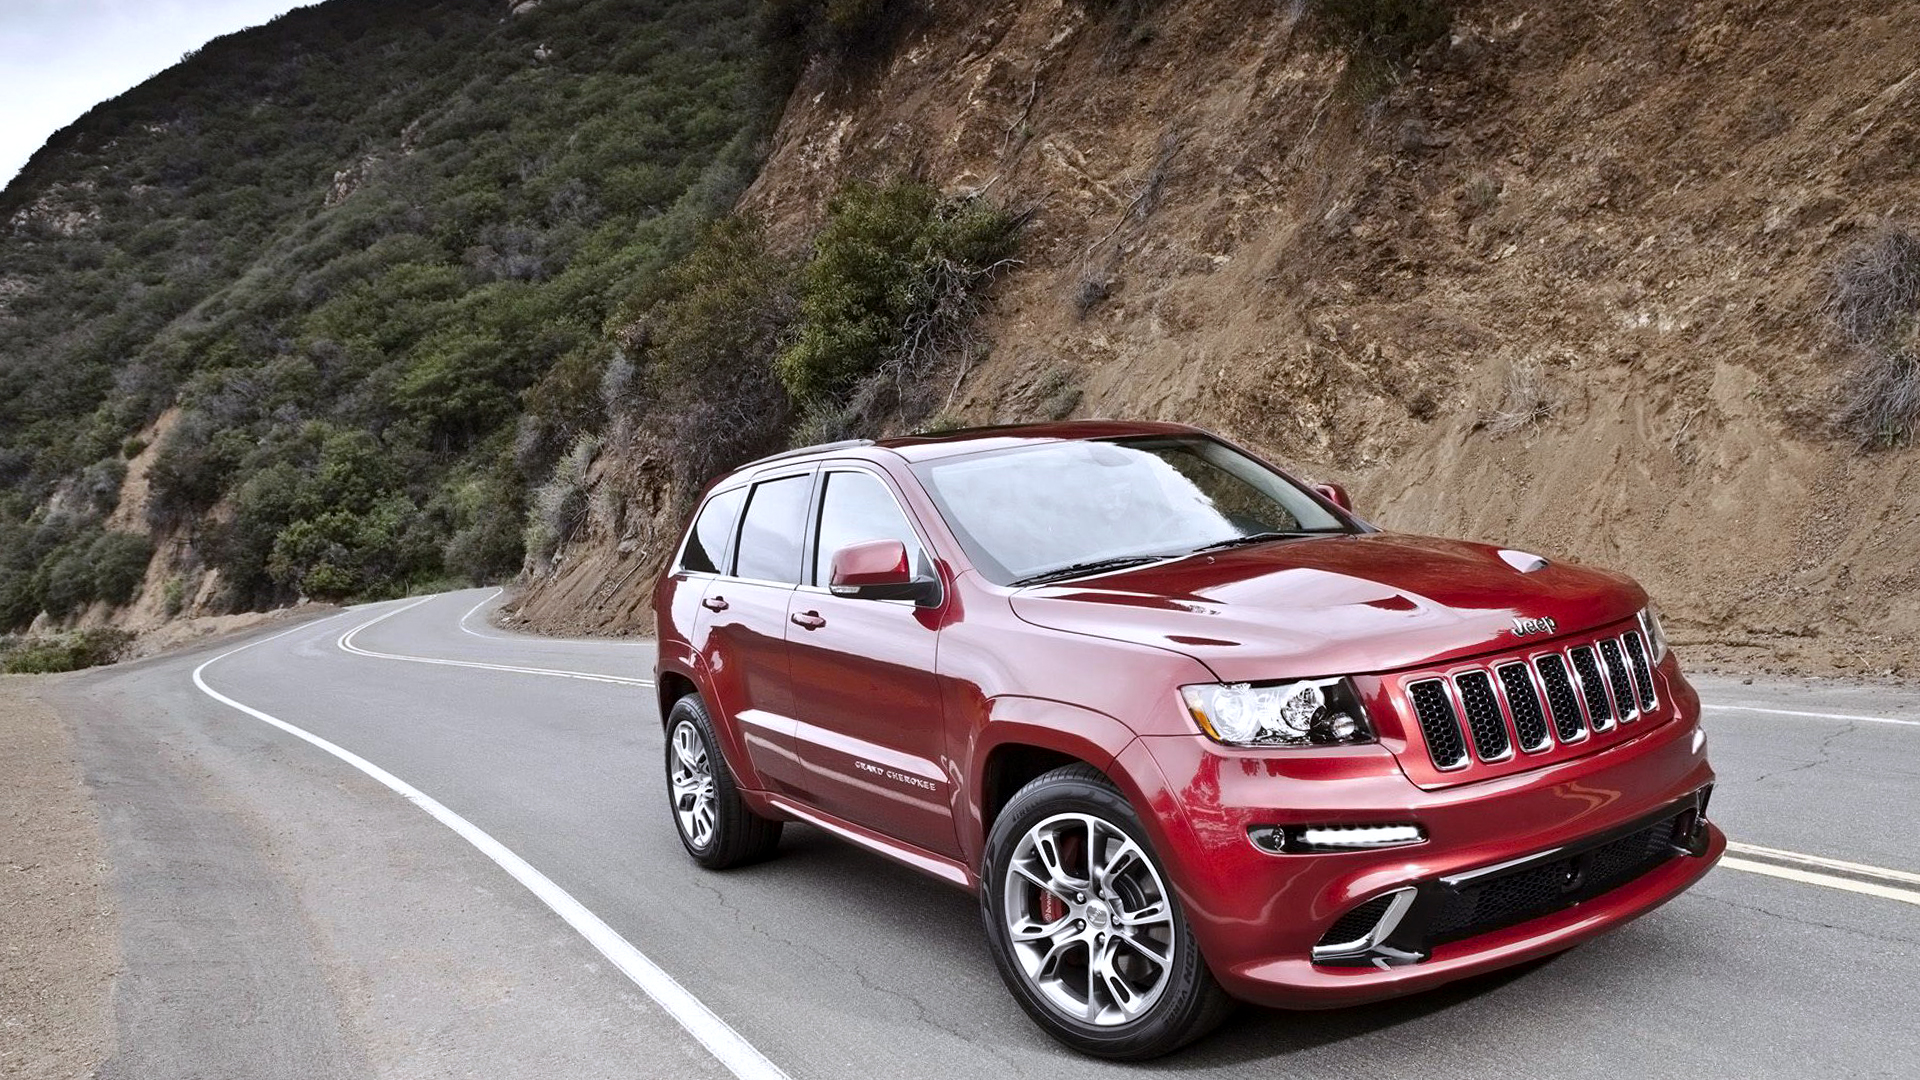 Red Car Jeep Compass Full Wallpaper